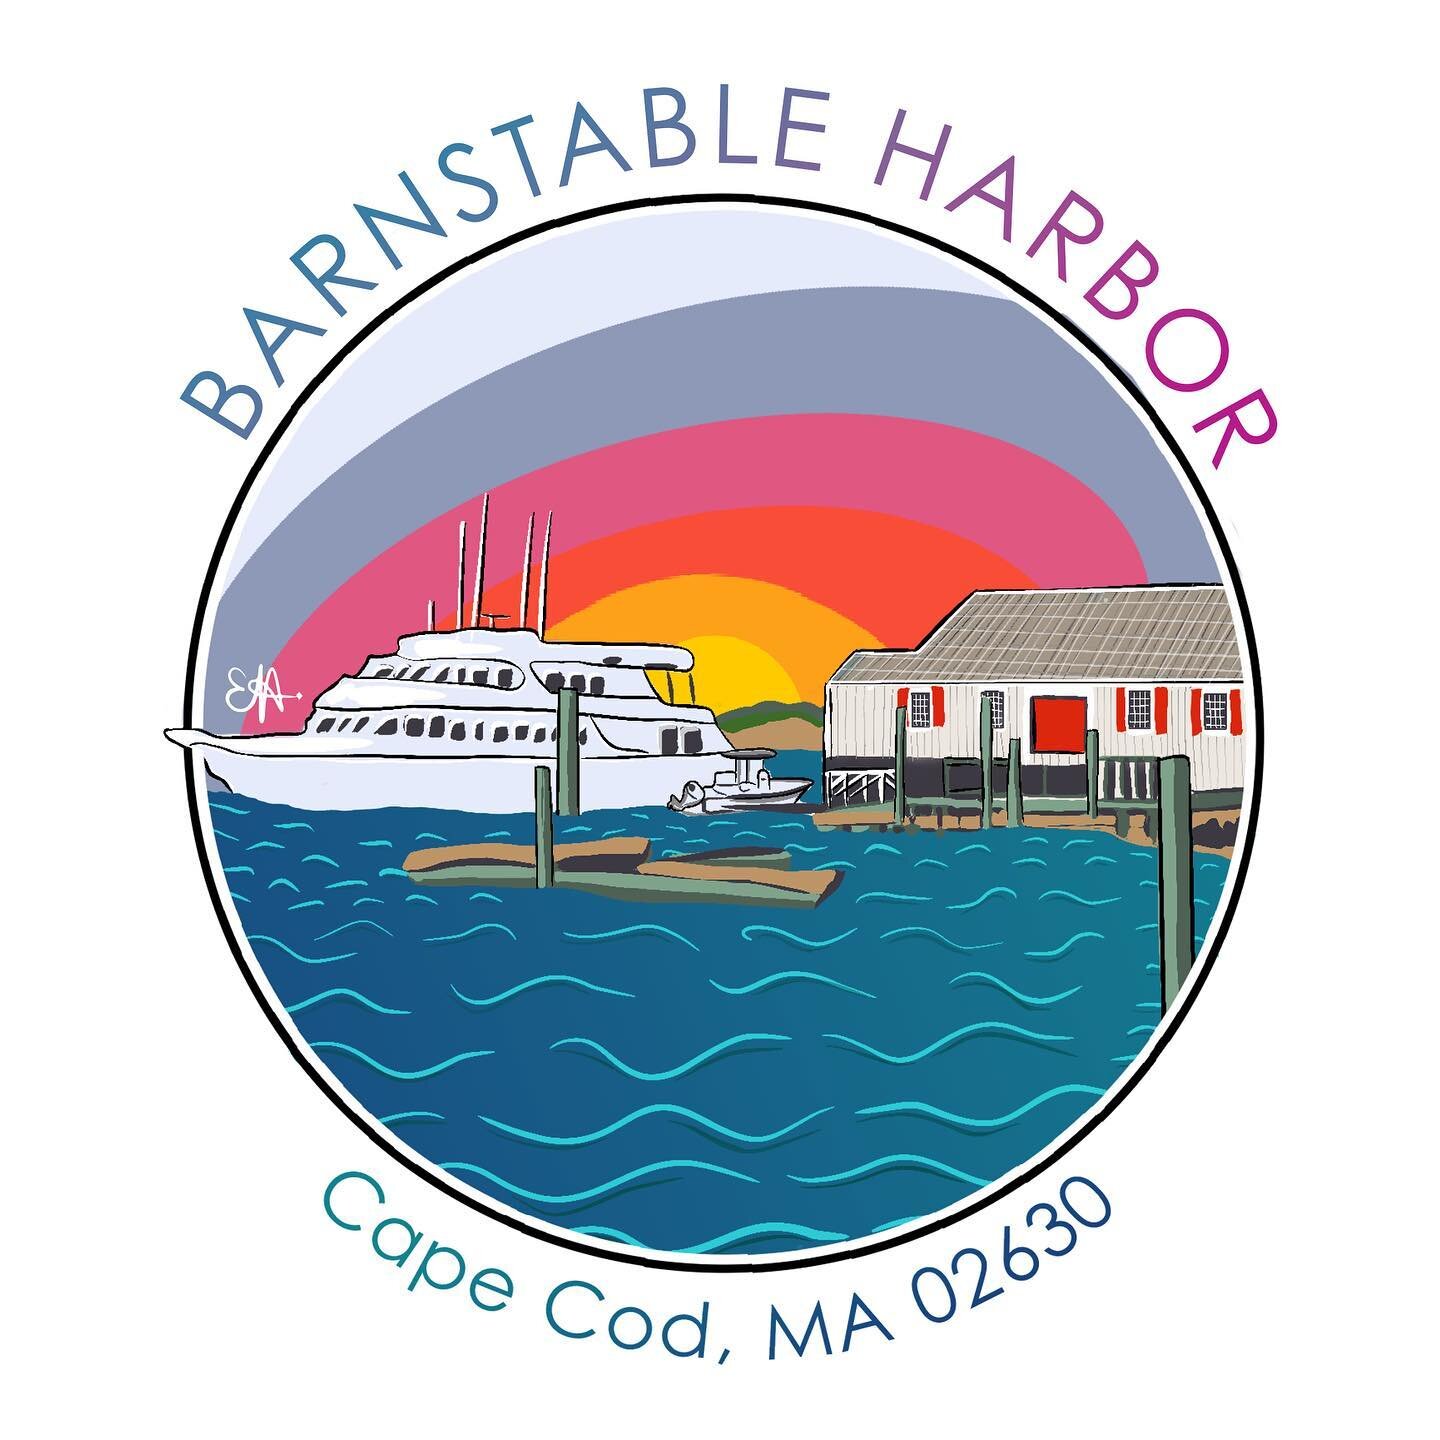 a little something for my favorite place. 🌎⚓️🌅🐚 I grew up around the corner from Barnstable Harbor, spending my summers bridge jumping  and working at the local waterfront restaurants. my aunt would (and still does) take us out for the most epic b